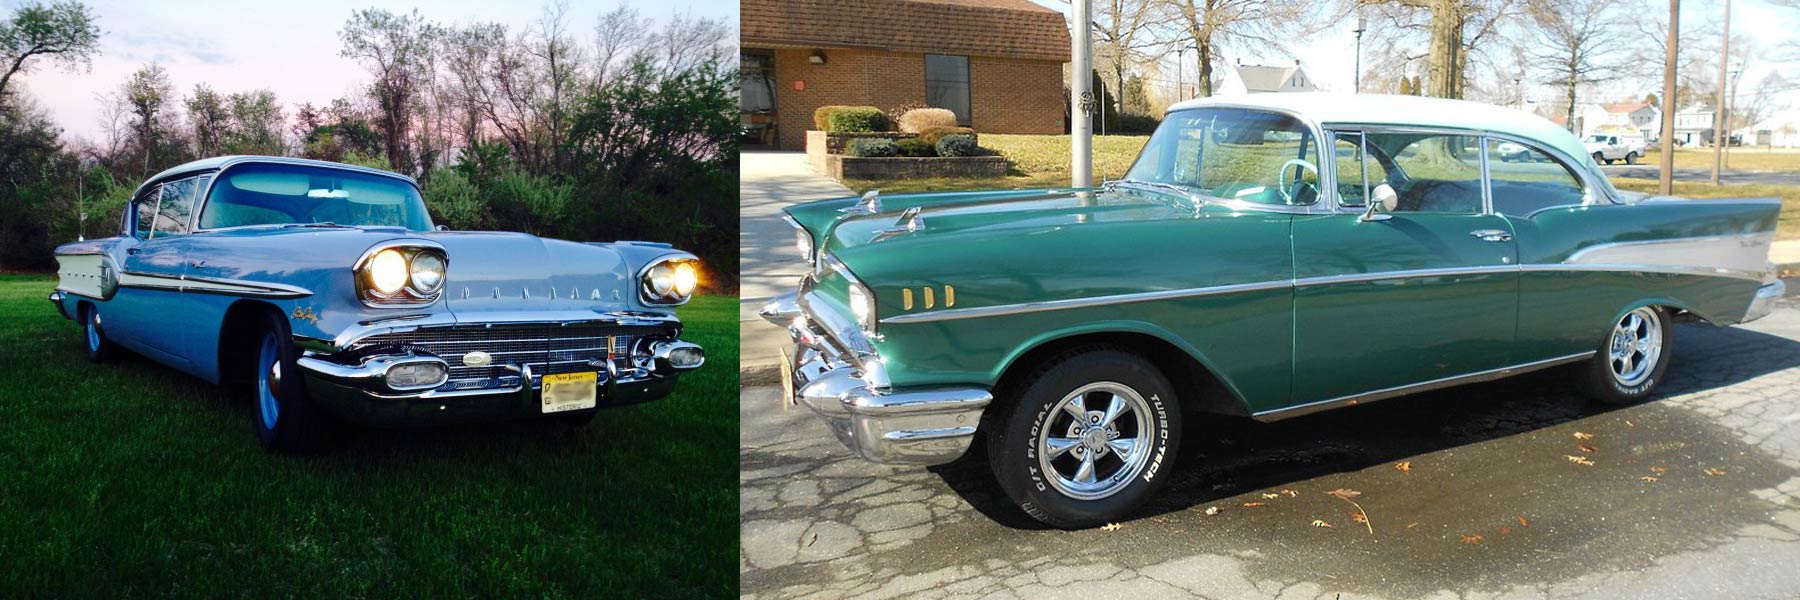 Collage of two antique vehicles, both with a similar greenish color